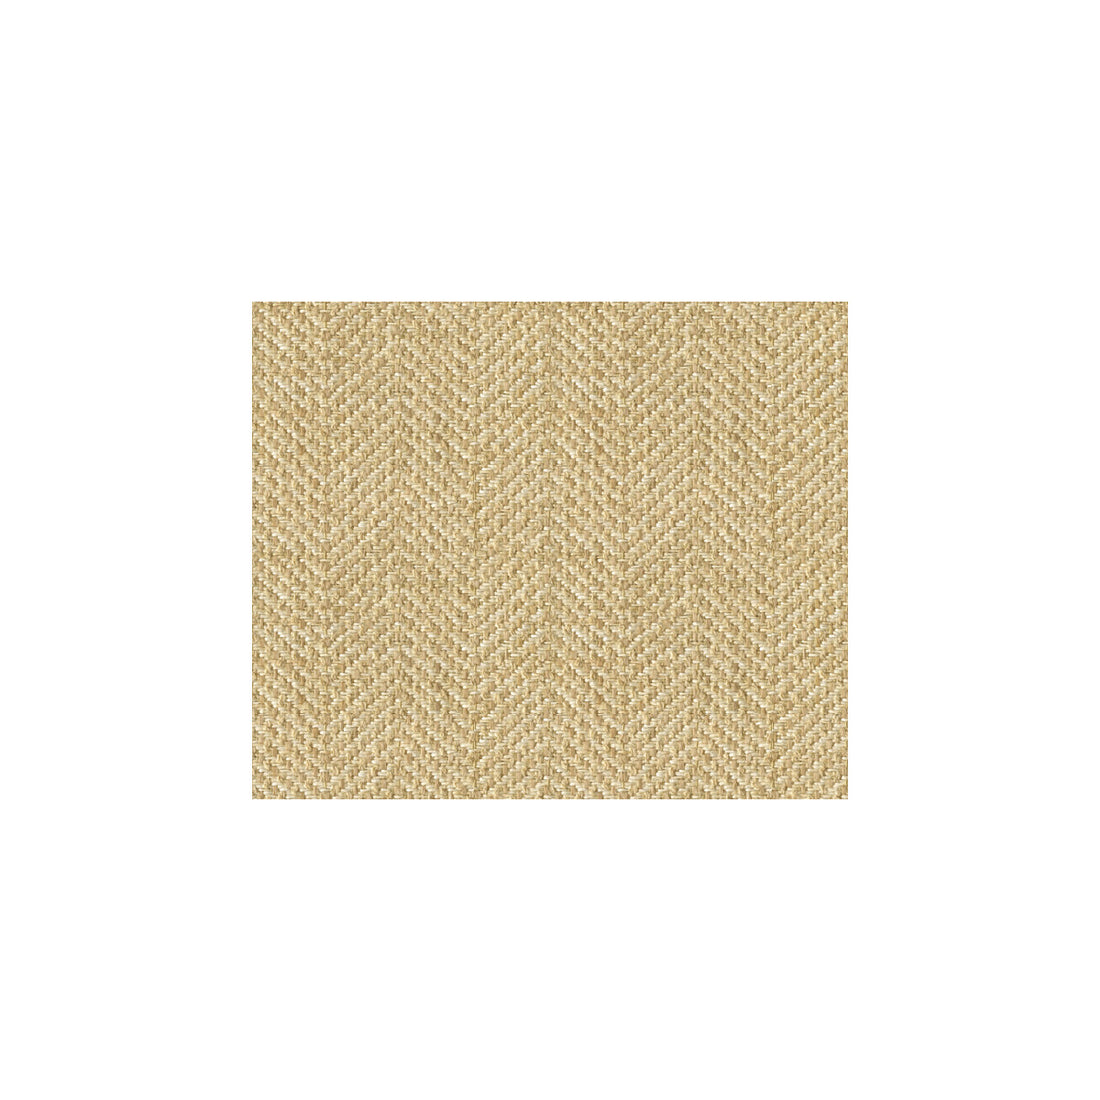 Kravet Contract fabric in 32018-116 color - pattern 32018.116.0 - by Kravet Contract